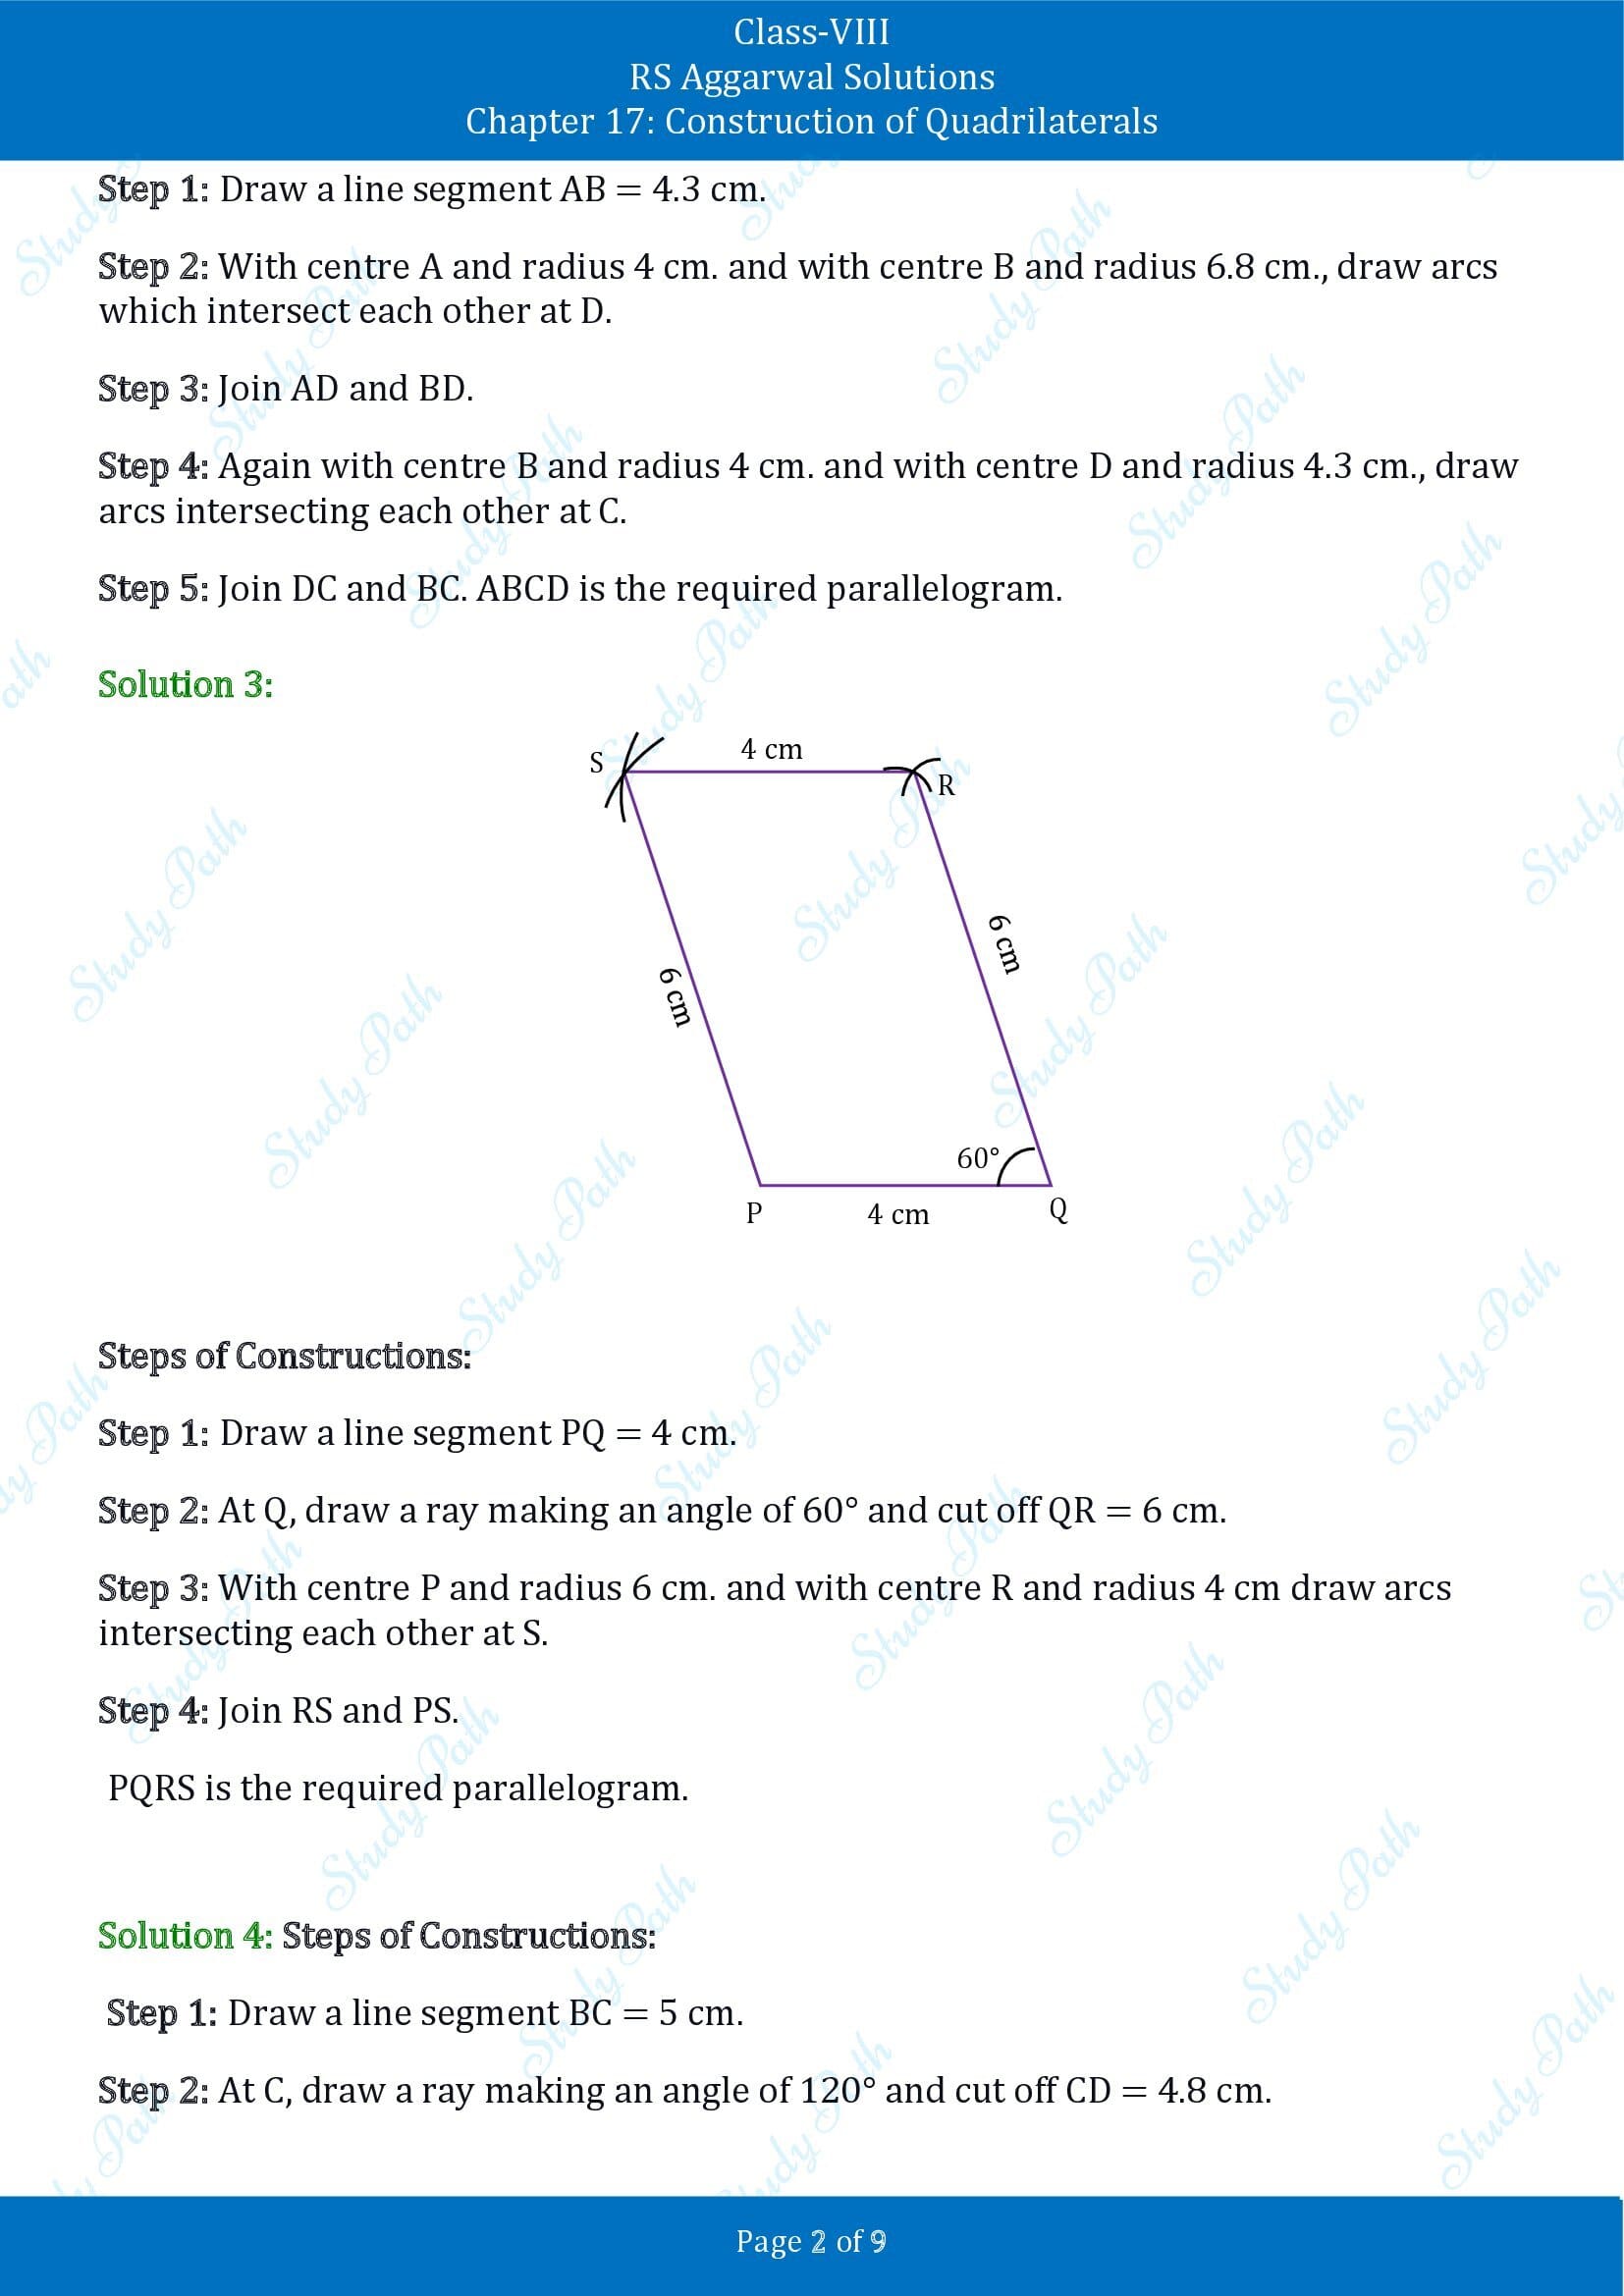 RS Aggarwal Solutions Class 8 Chapter 17 Construction of Quadrilaterals Exercise 17B 00002